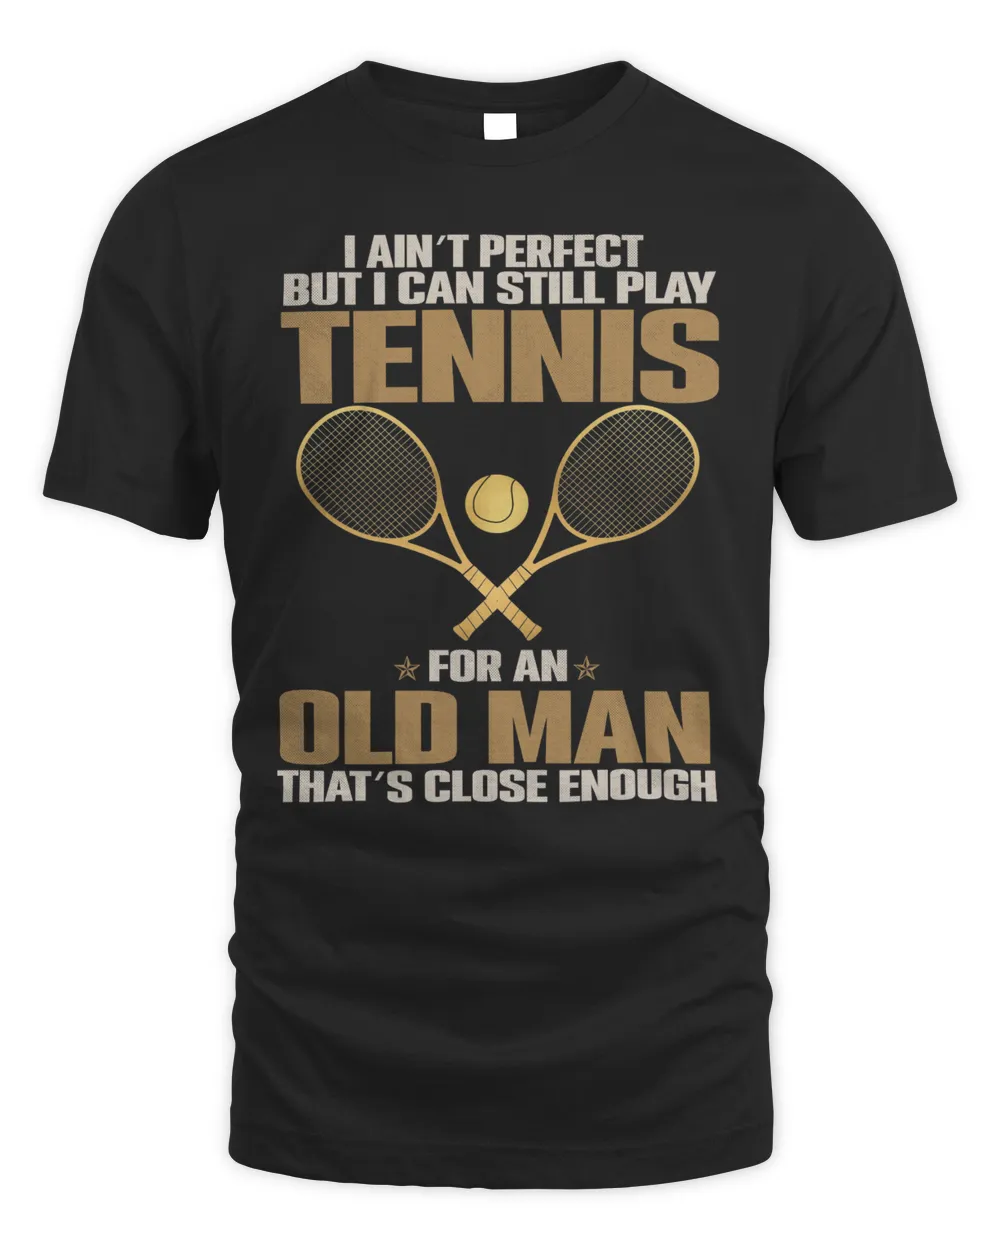 But I can still play tennis for an old man